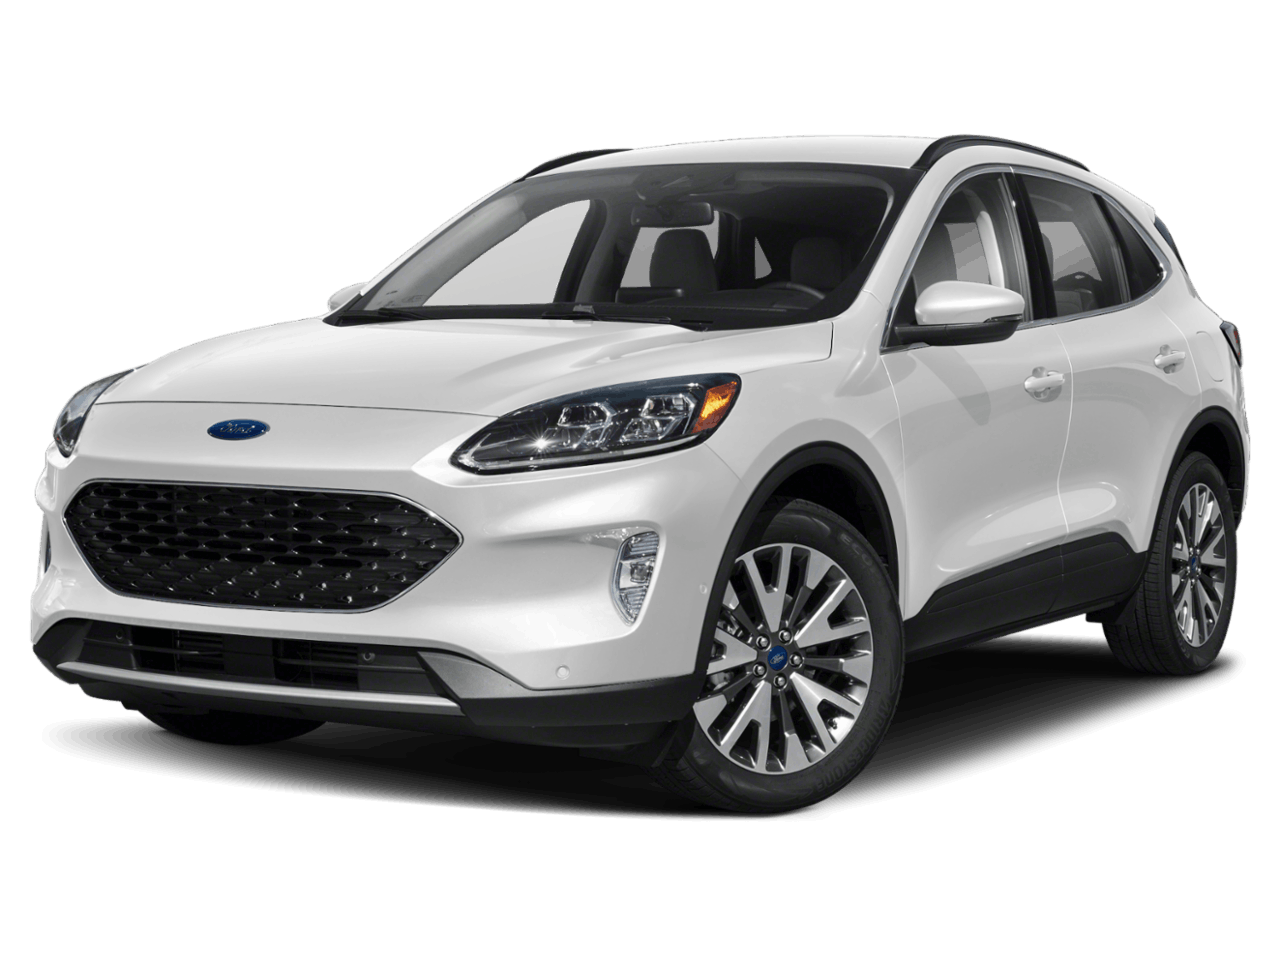 Used 2020 Ford Escape Titanium with VIN 1FMCU9J94LUB05118 for sale in Waite Park, Minnesota